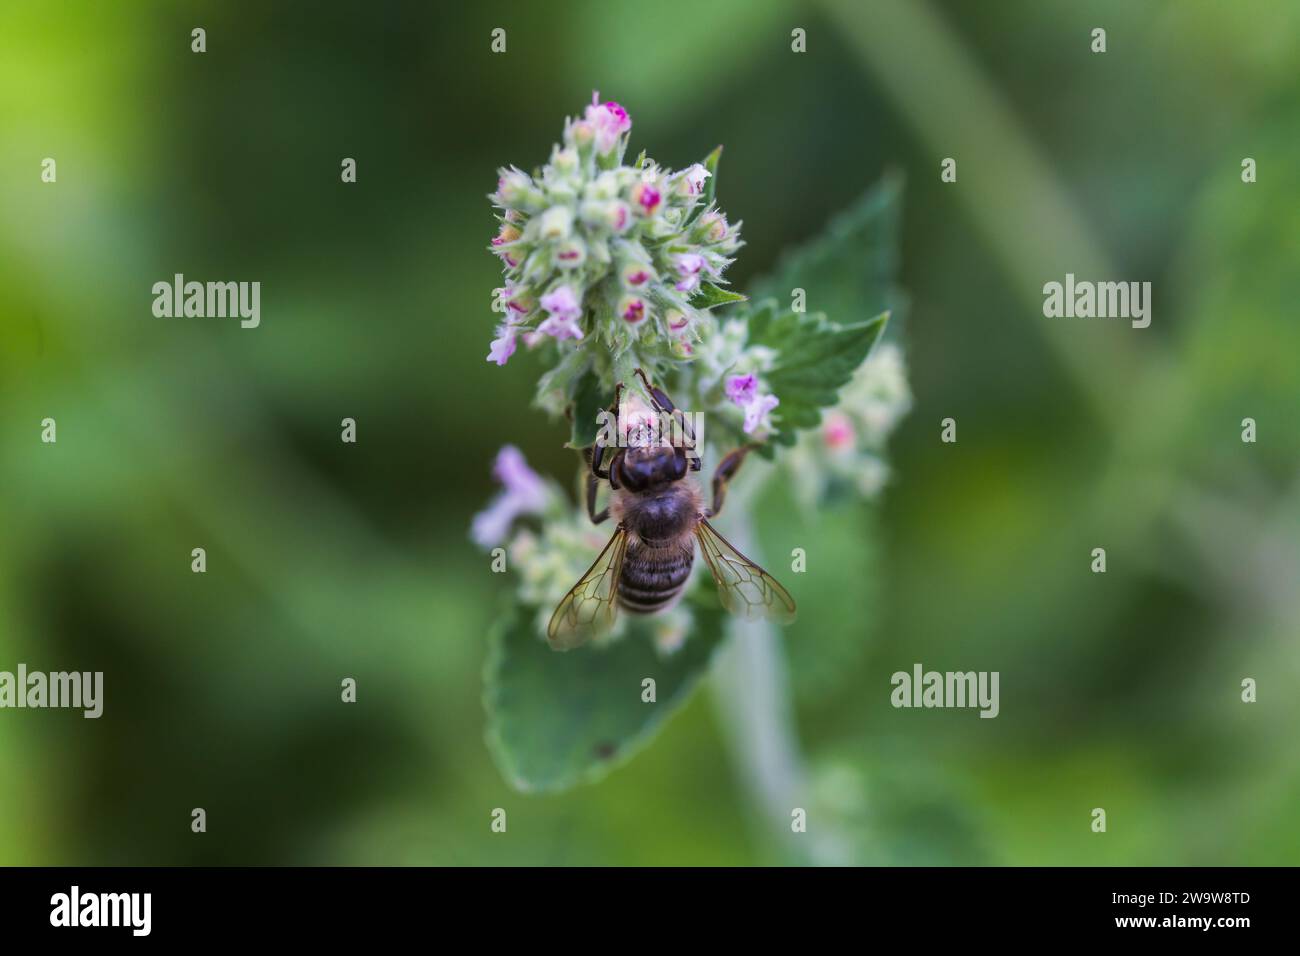 Lamium album, white nettle, white dead-nettle purple flowers. Honeybees collect nectar from the blooming Lamium album. Copy space Stock Photo